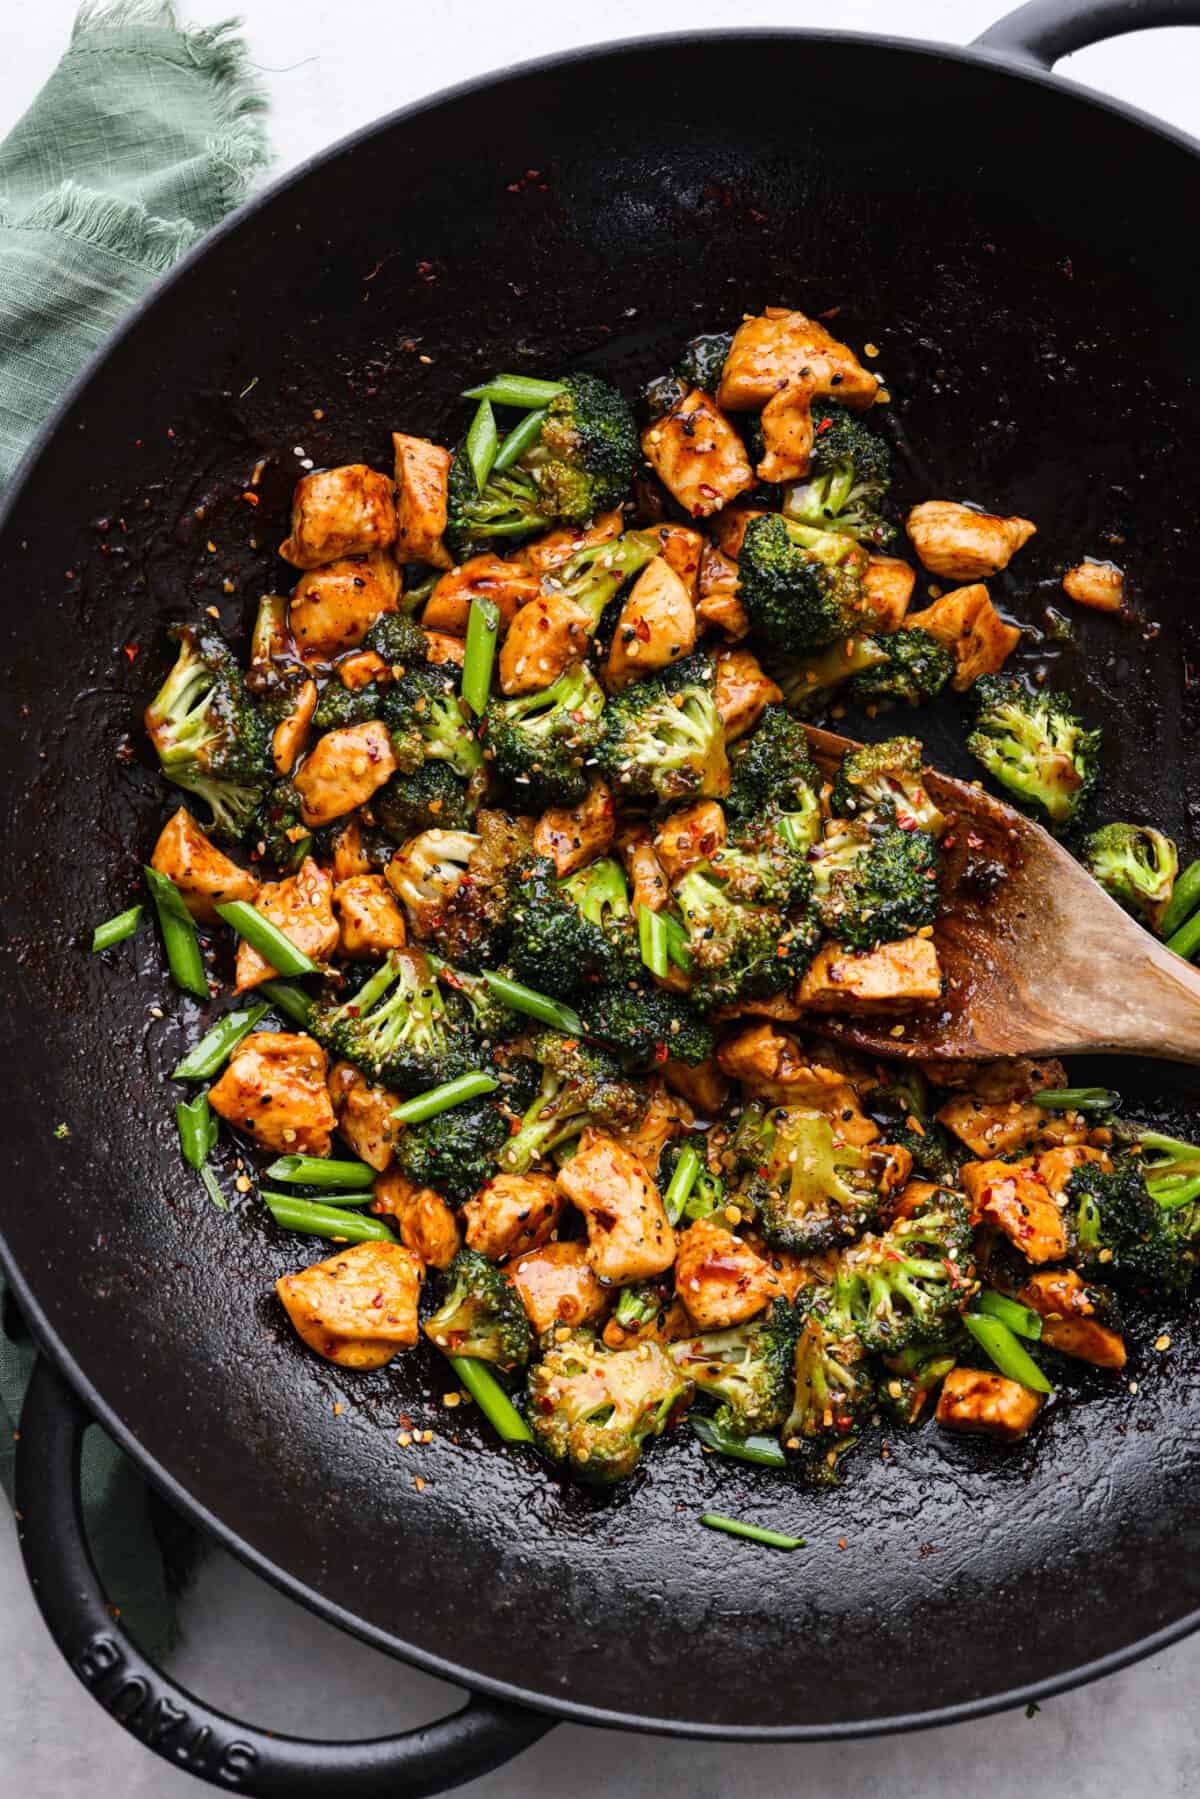 Top-down view of Chinese chicken and broccoli being stir-fried in a wok.